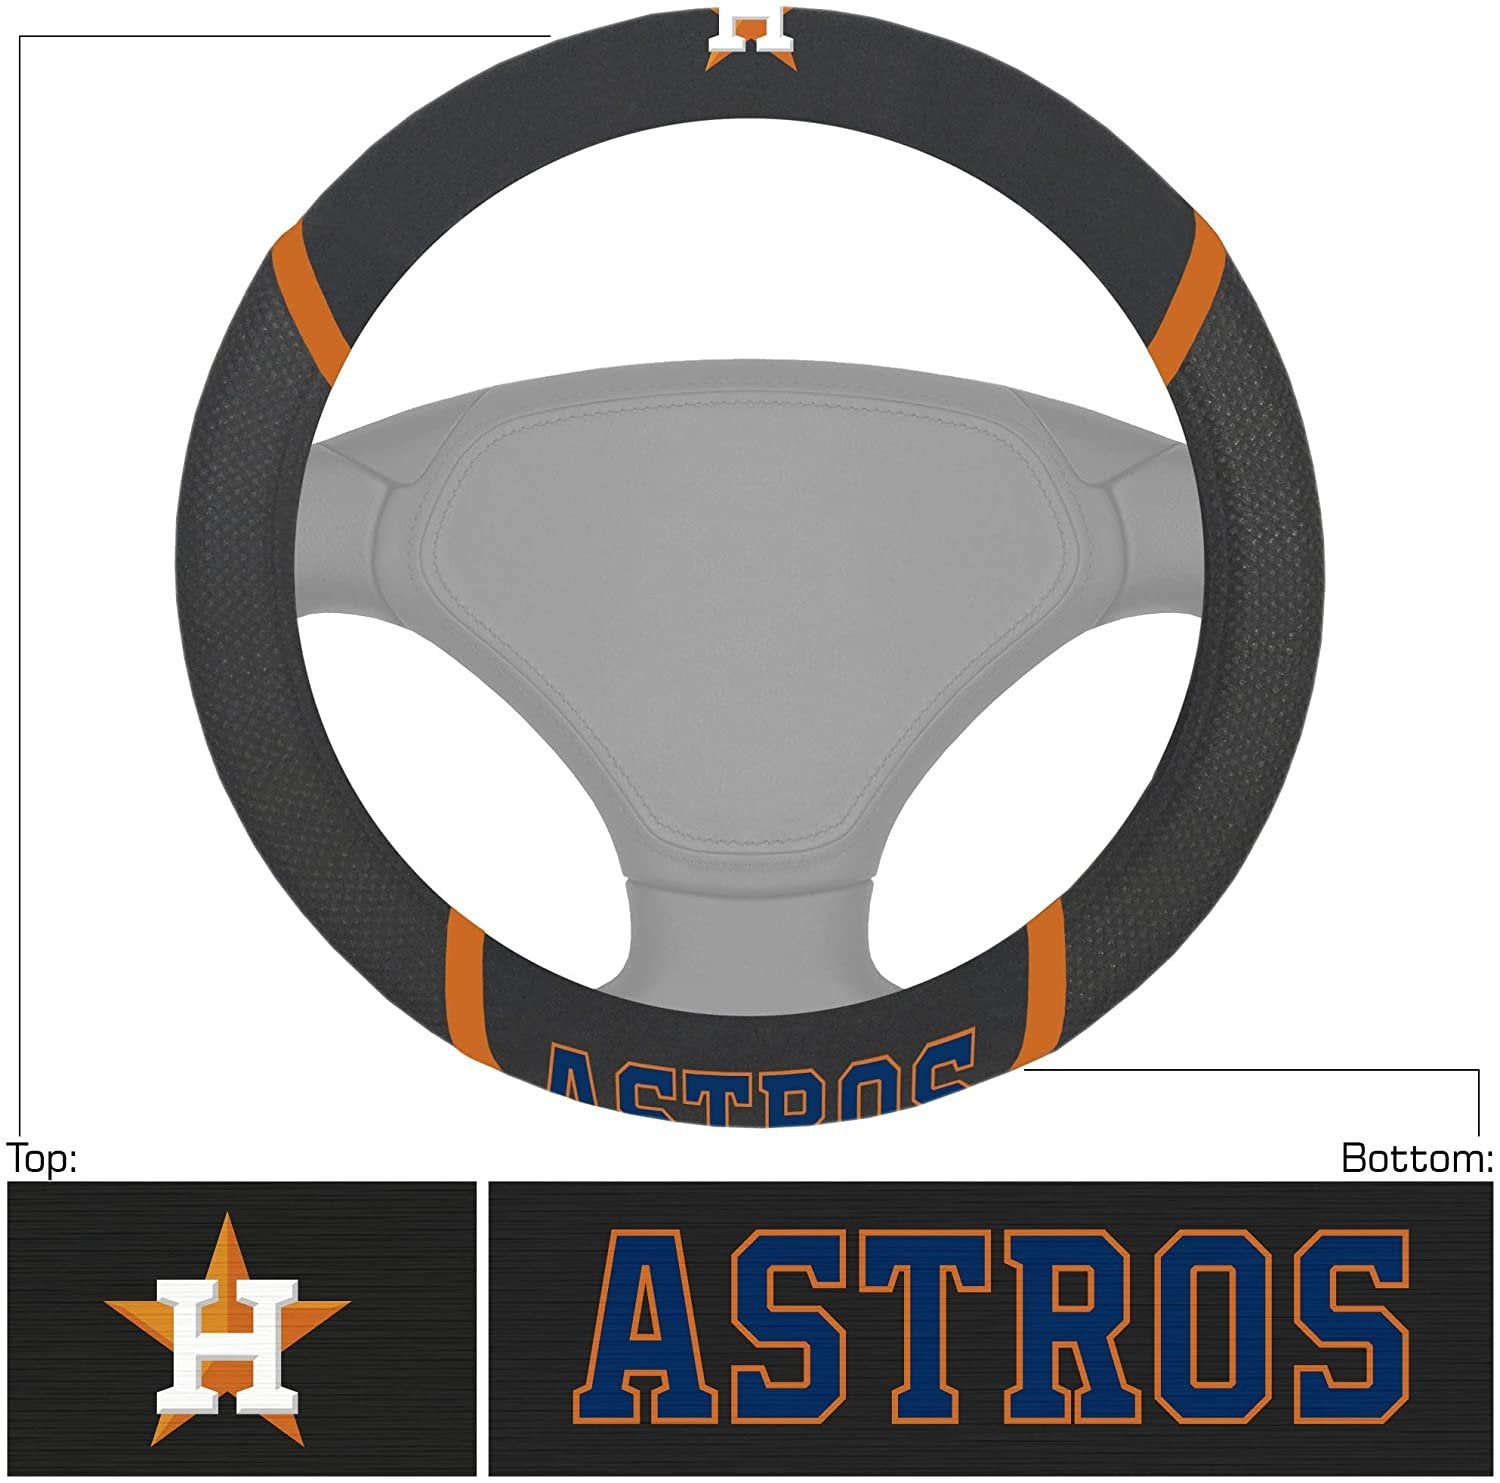 Houston Astros Steering Wheel Cover Premium Embroidered Black 15 Inch